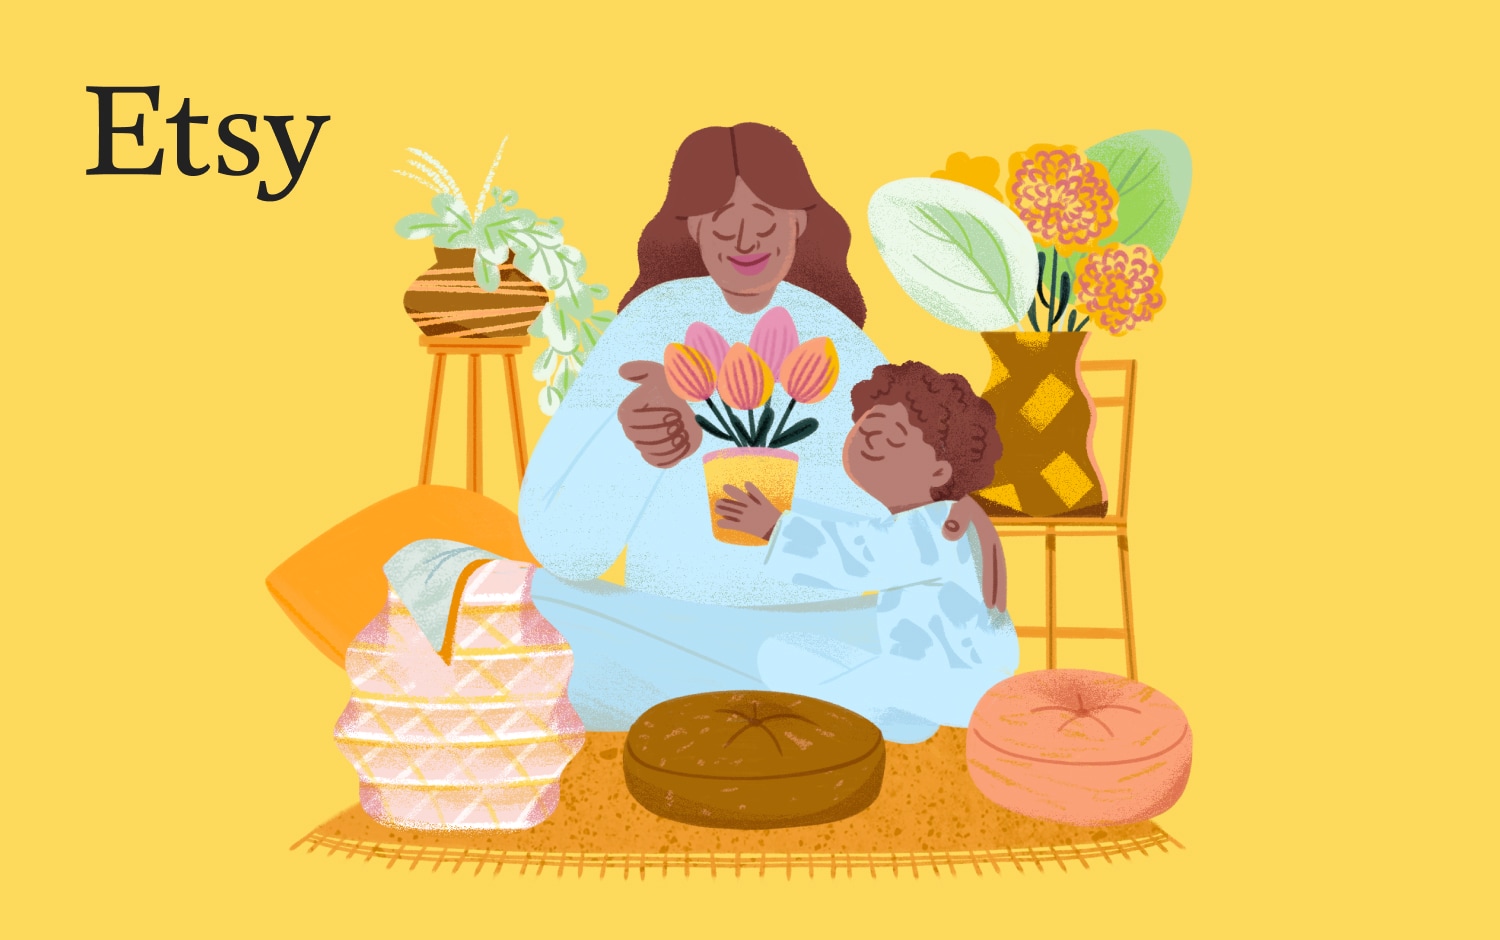 Illustration depicting a woman and a child in a cosy room. The child is presenting a potted tulip plant to the woman, surrounded by indoor plants and two stools. The scene is set against a yellow background, featuring the Etsy logo in black font in the top left corner